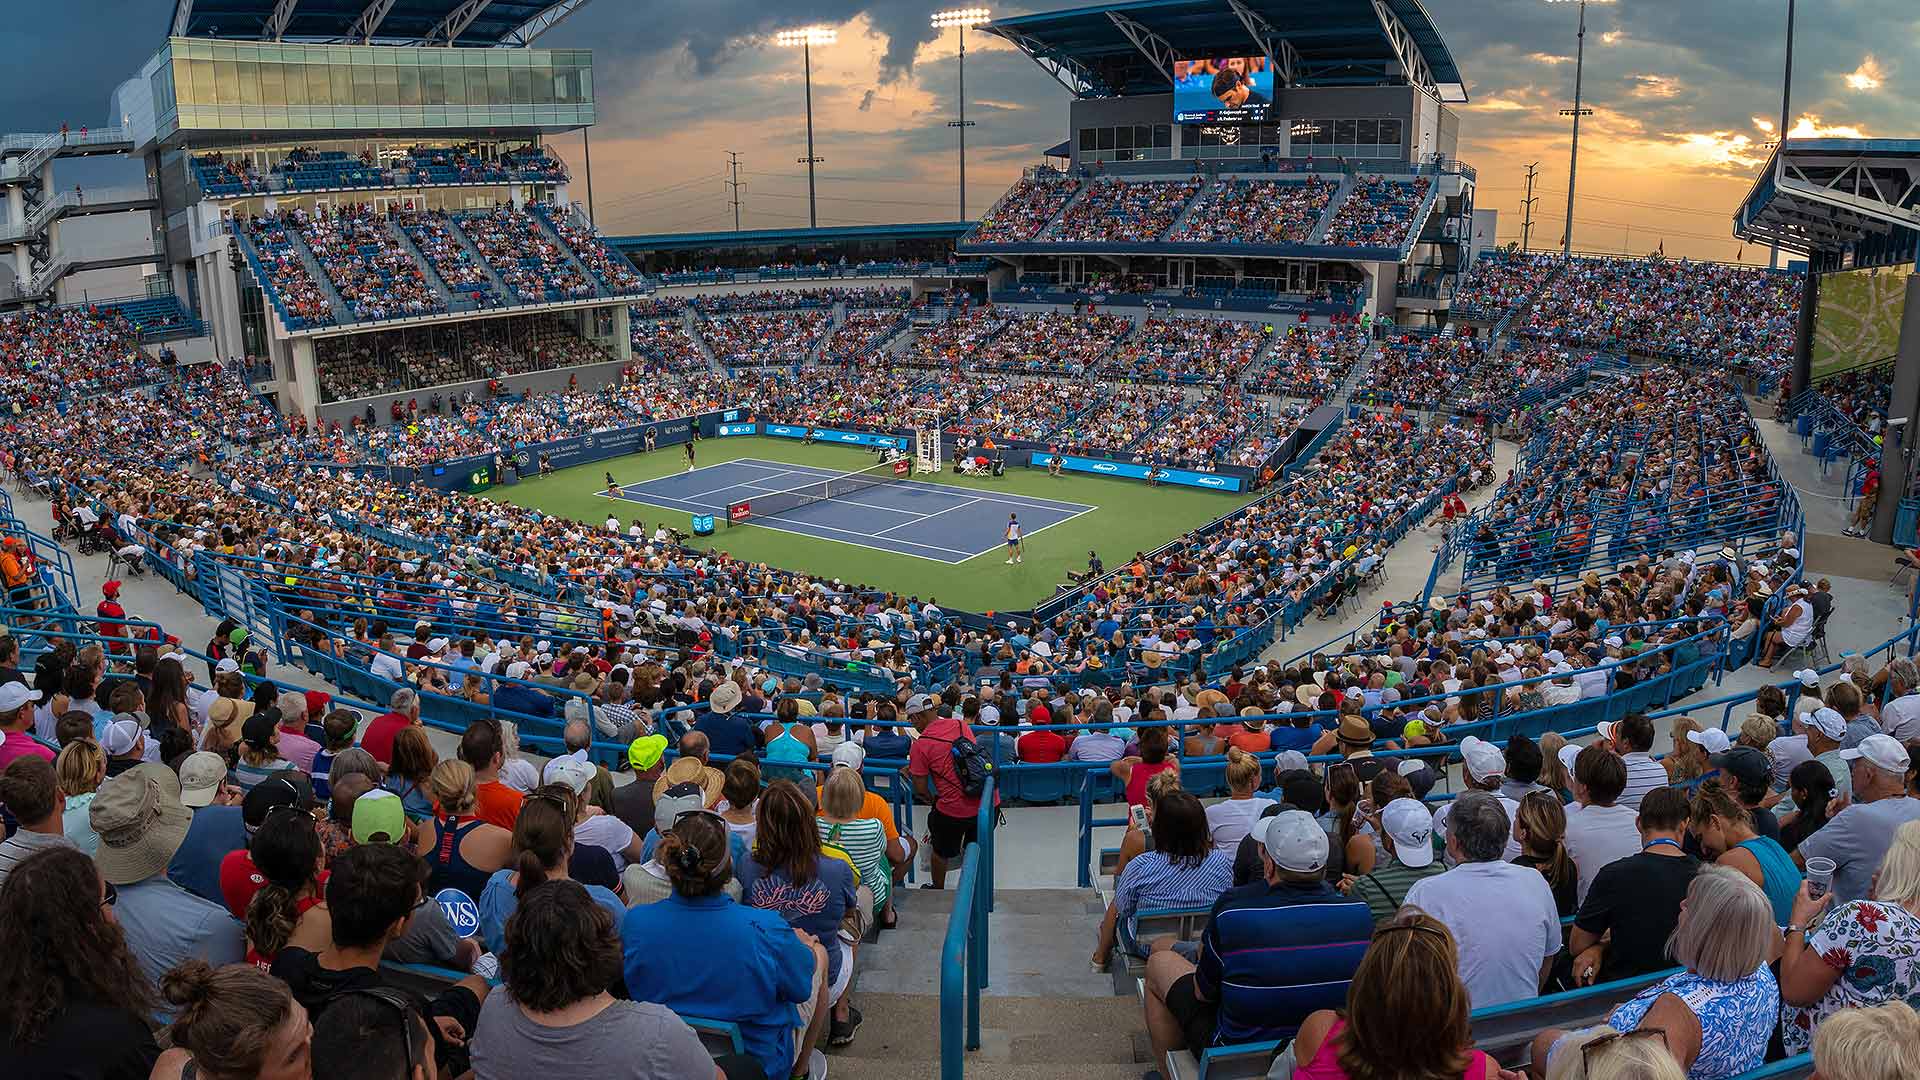 Western & Southern Open centre court